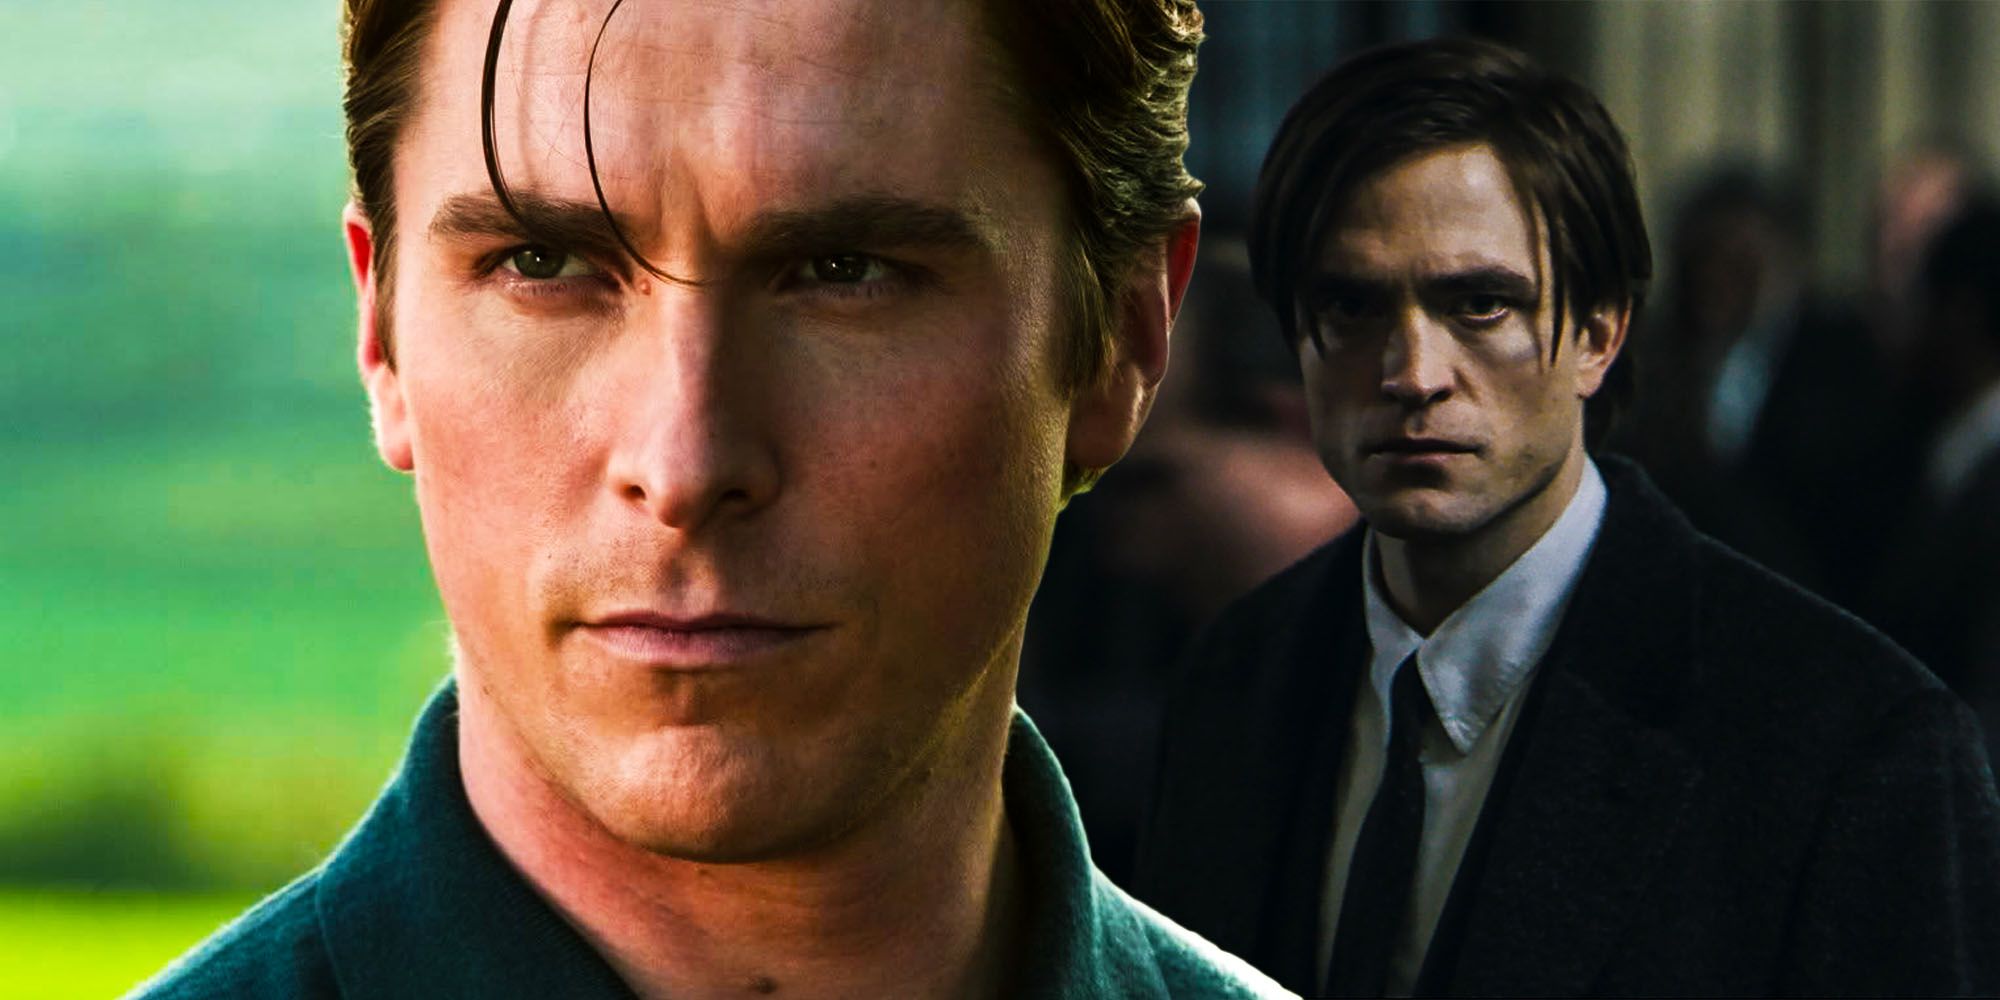 The Batman: How Pattinson's Salary Compares To Bale For Batman Begins